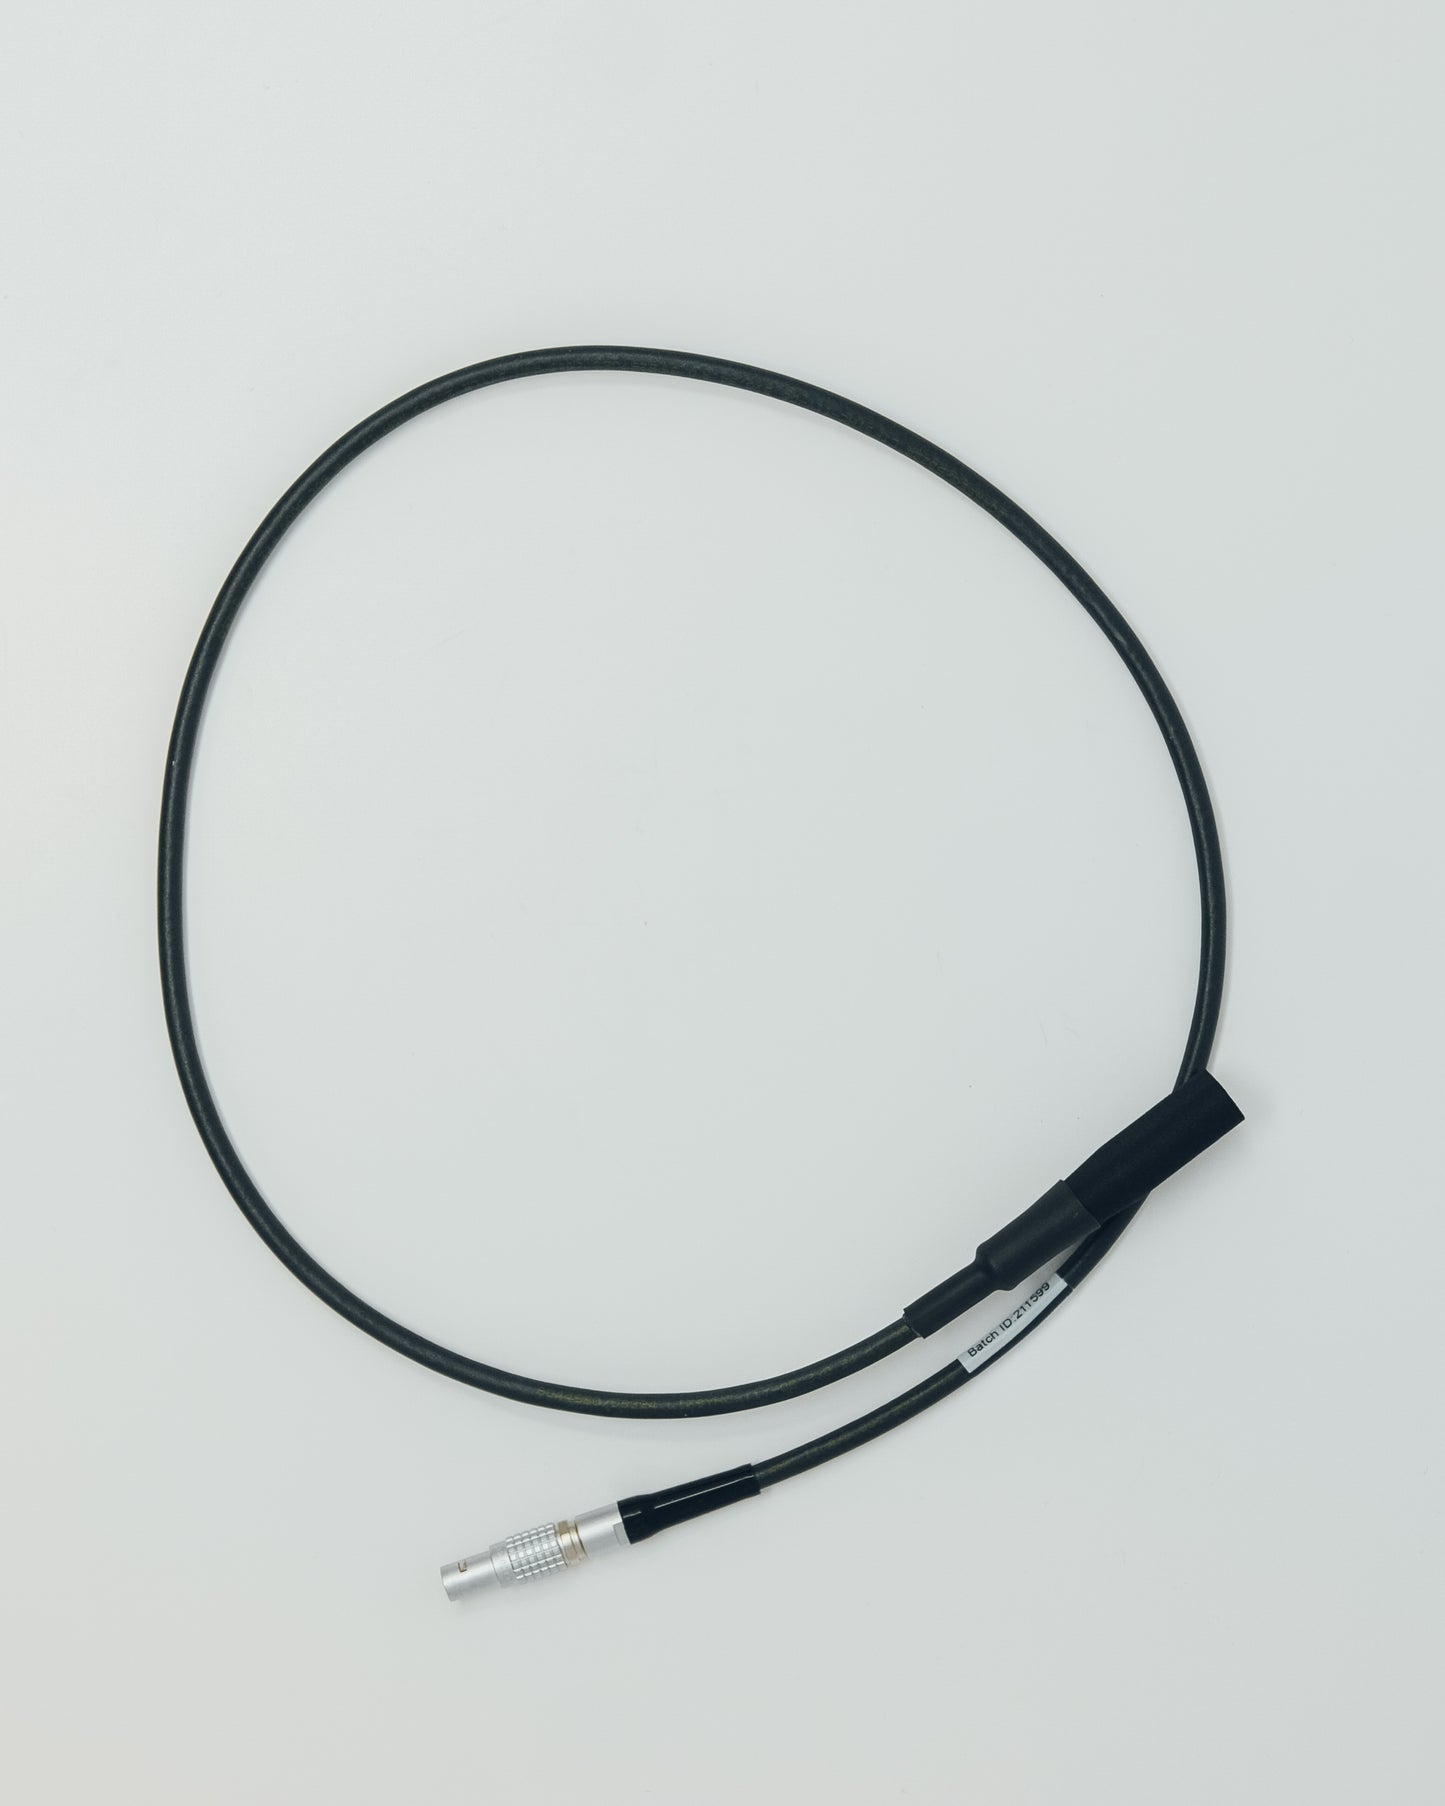 SPE10-LM4-CABLE